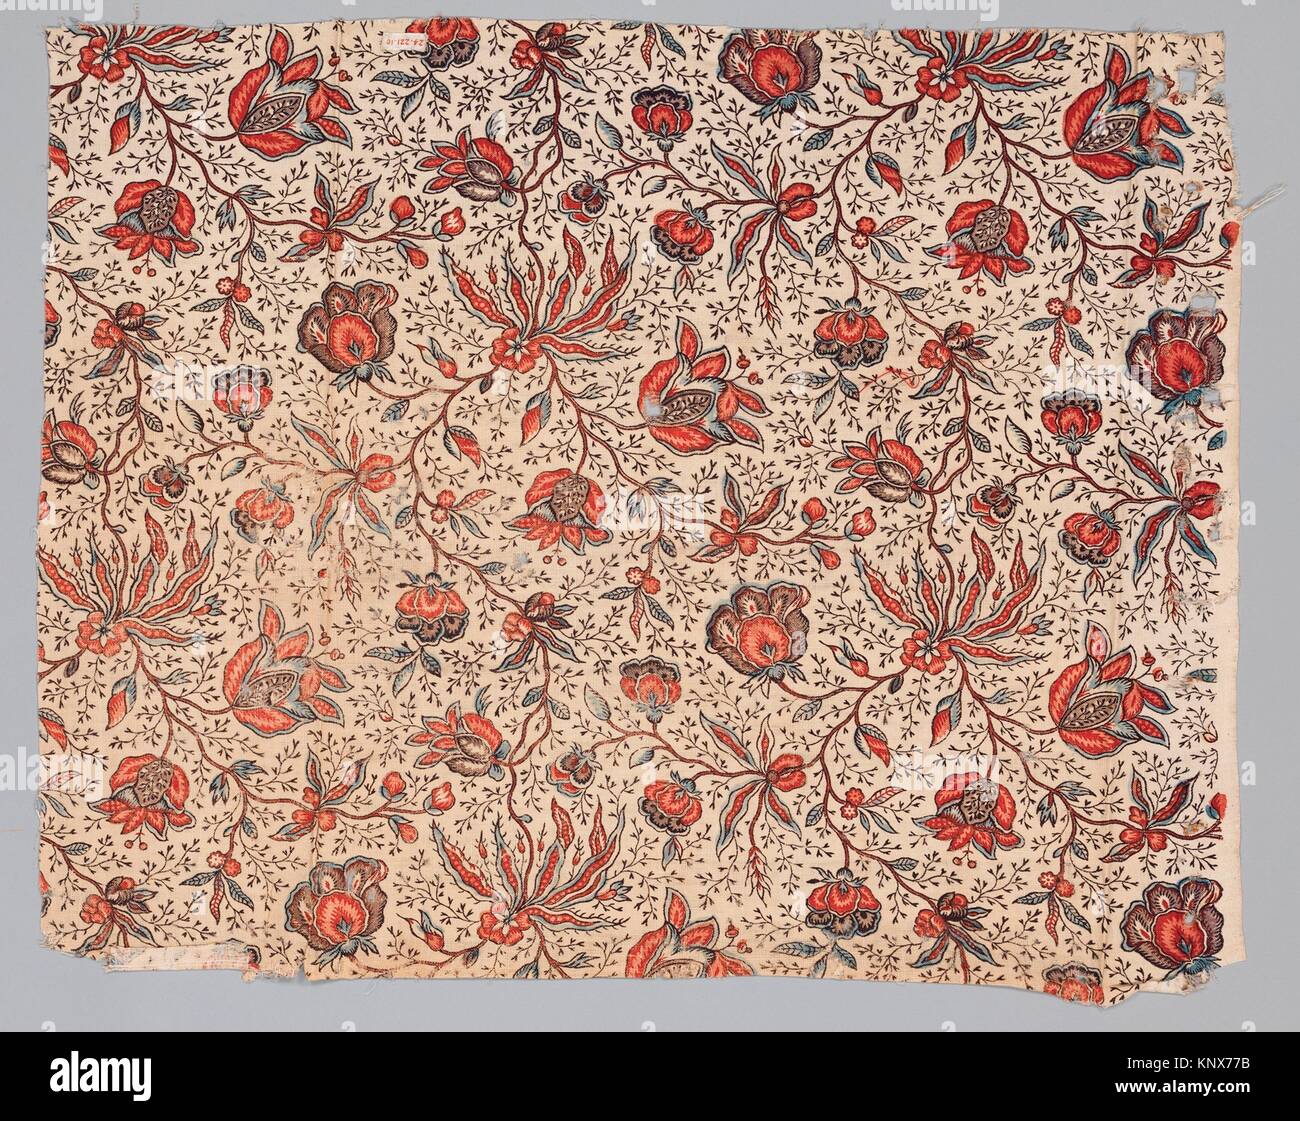 Piece. Date: ca. 1785; Culture: French; Medium: Linen; Dimensions: L. 23 1/4 x W. 19 inches; Classification: Textiles-Printed Stock Photo